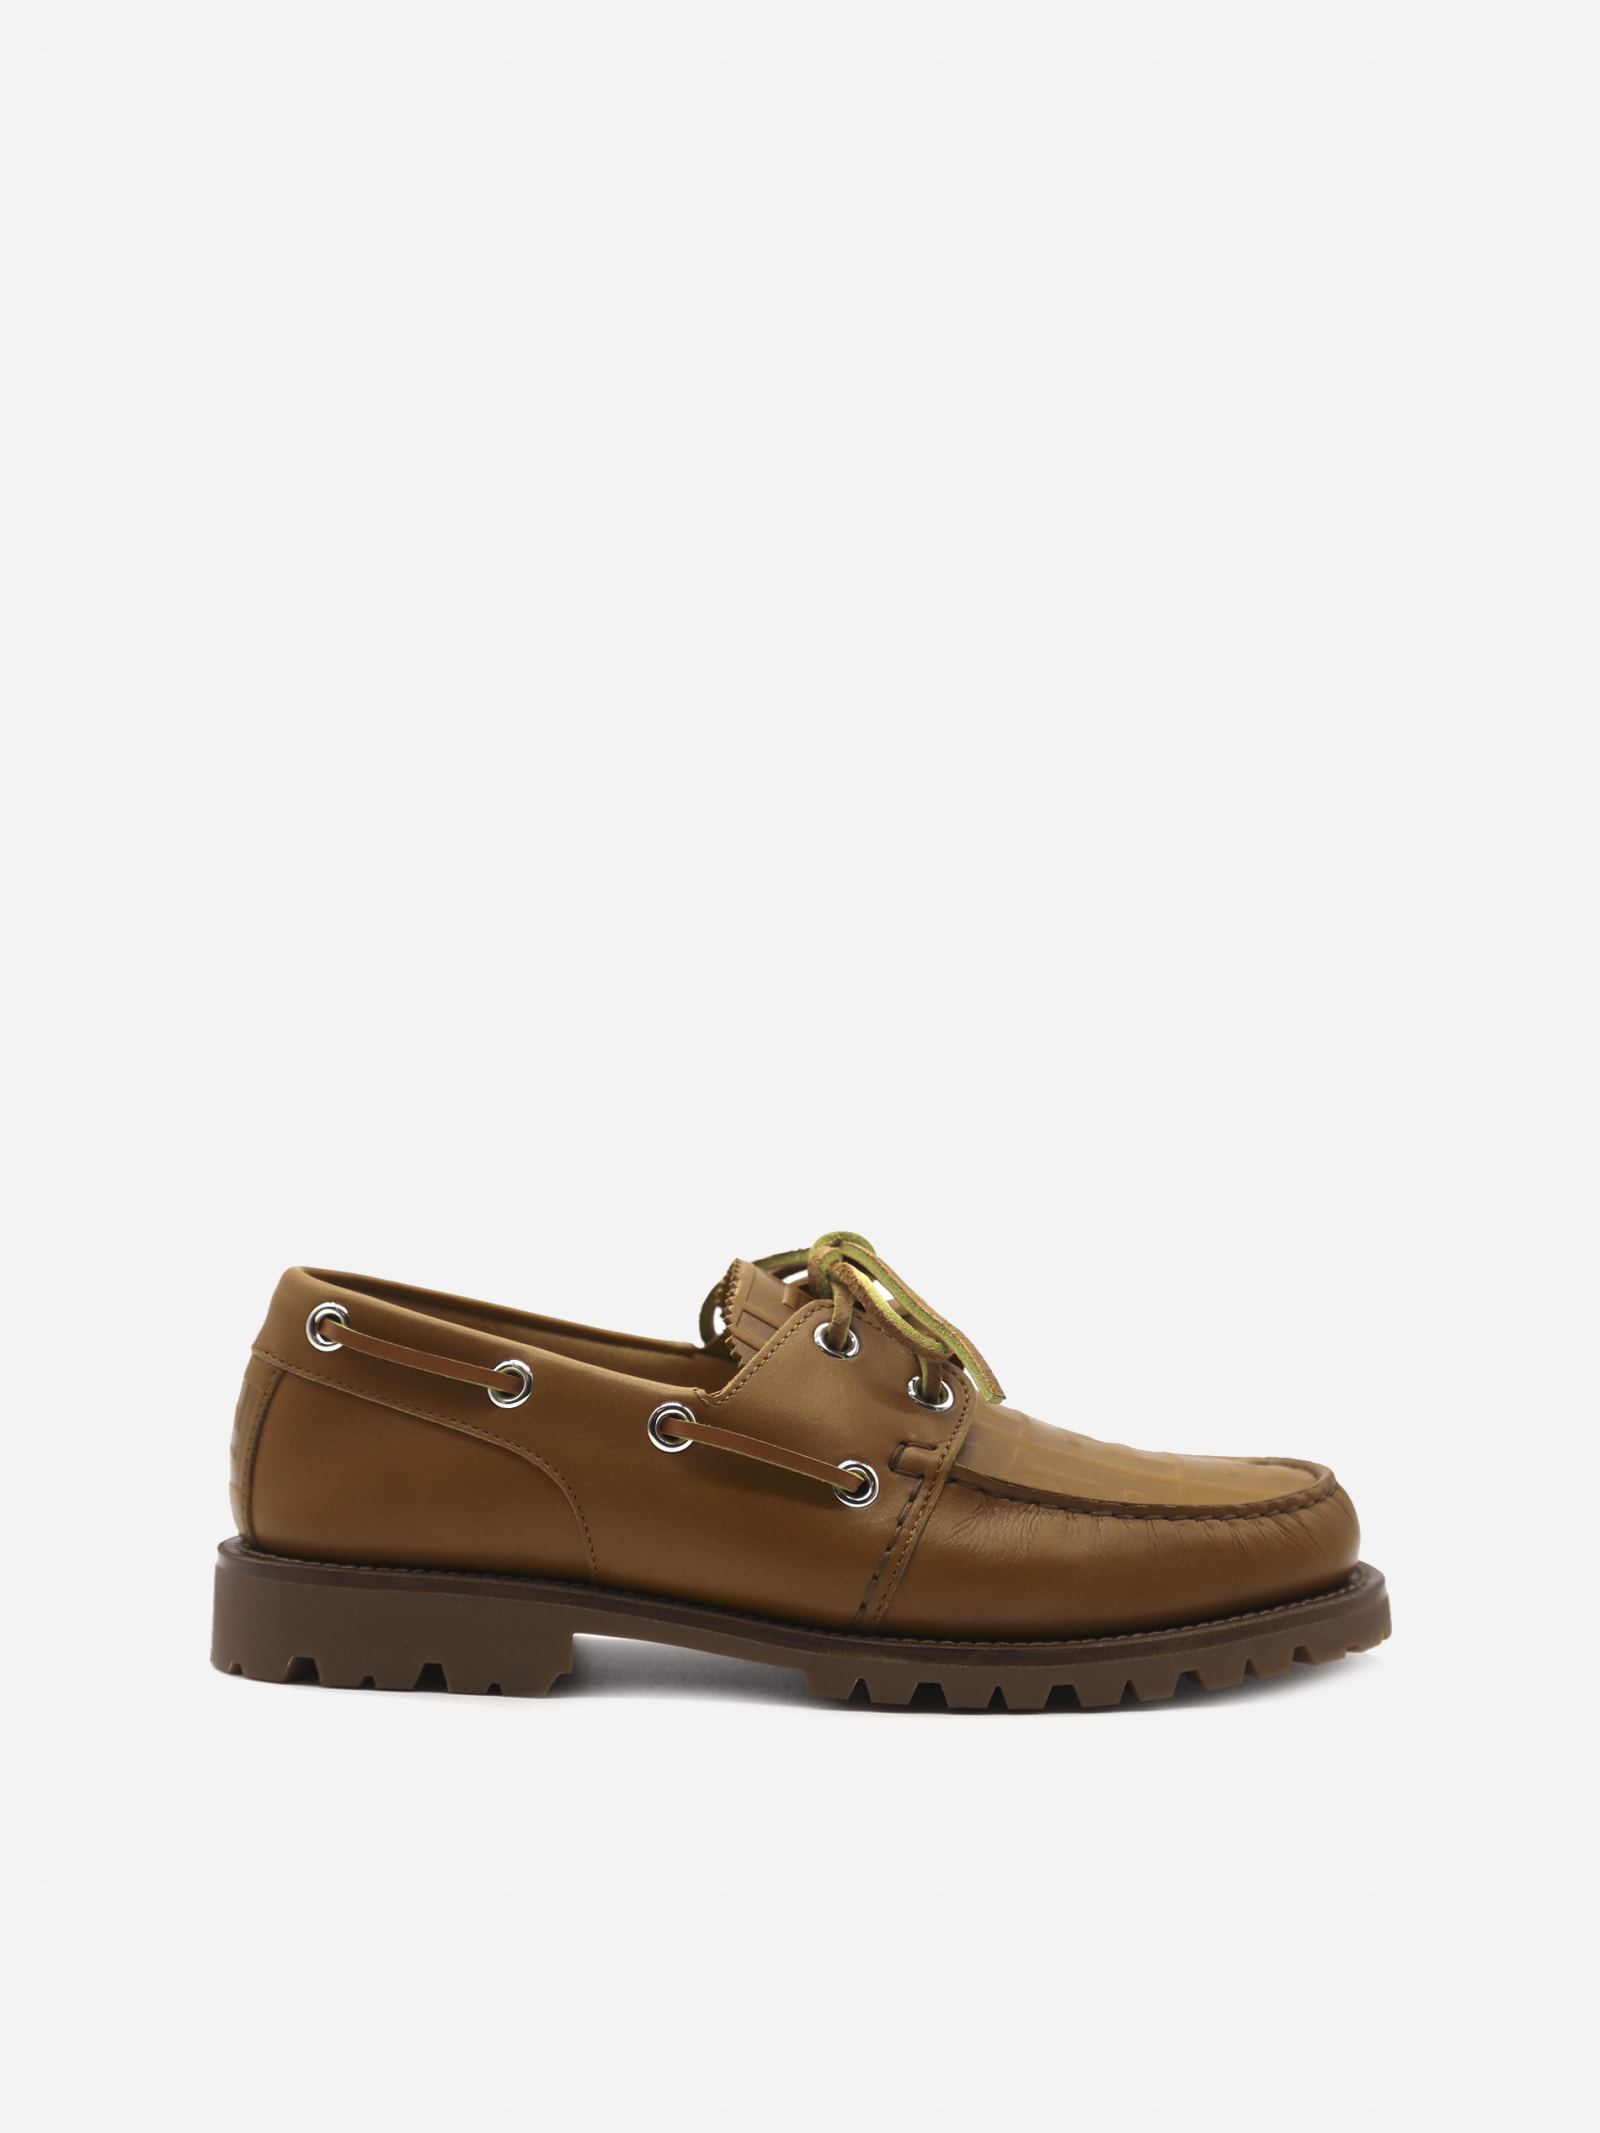 Fendi Leather Loafers With Hot-stamped Ff Motif